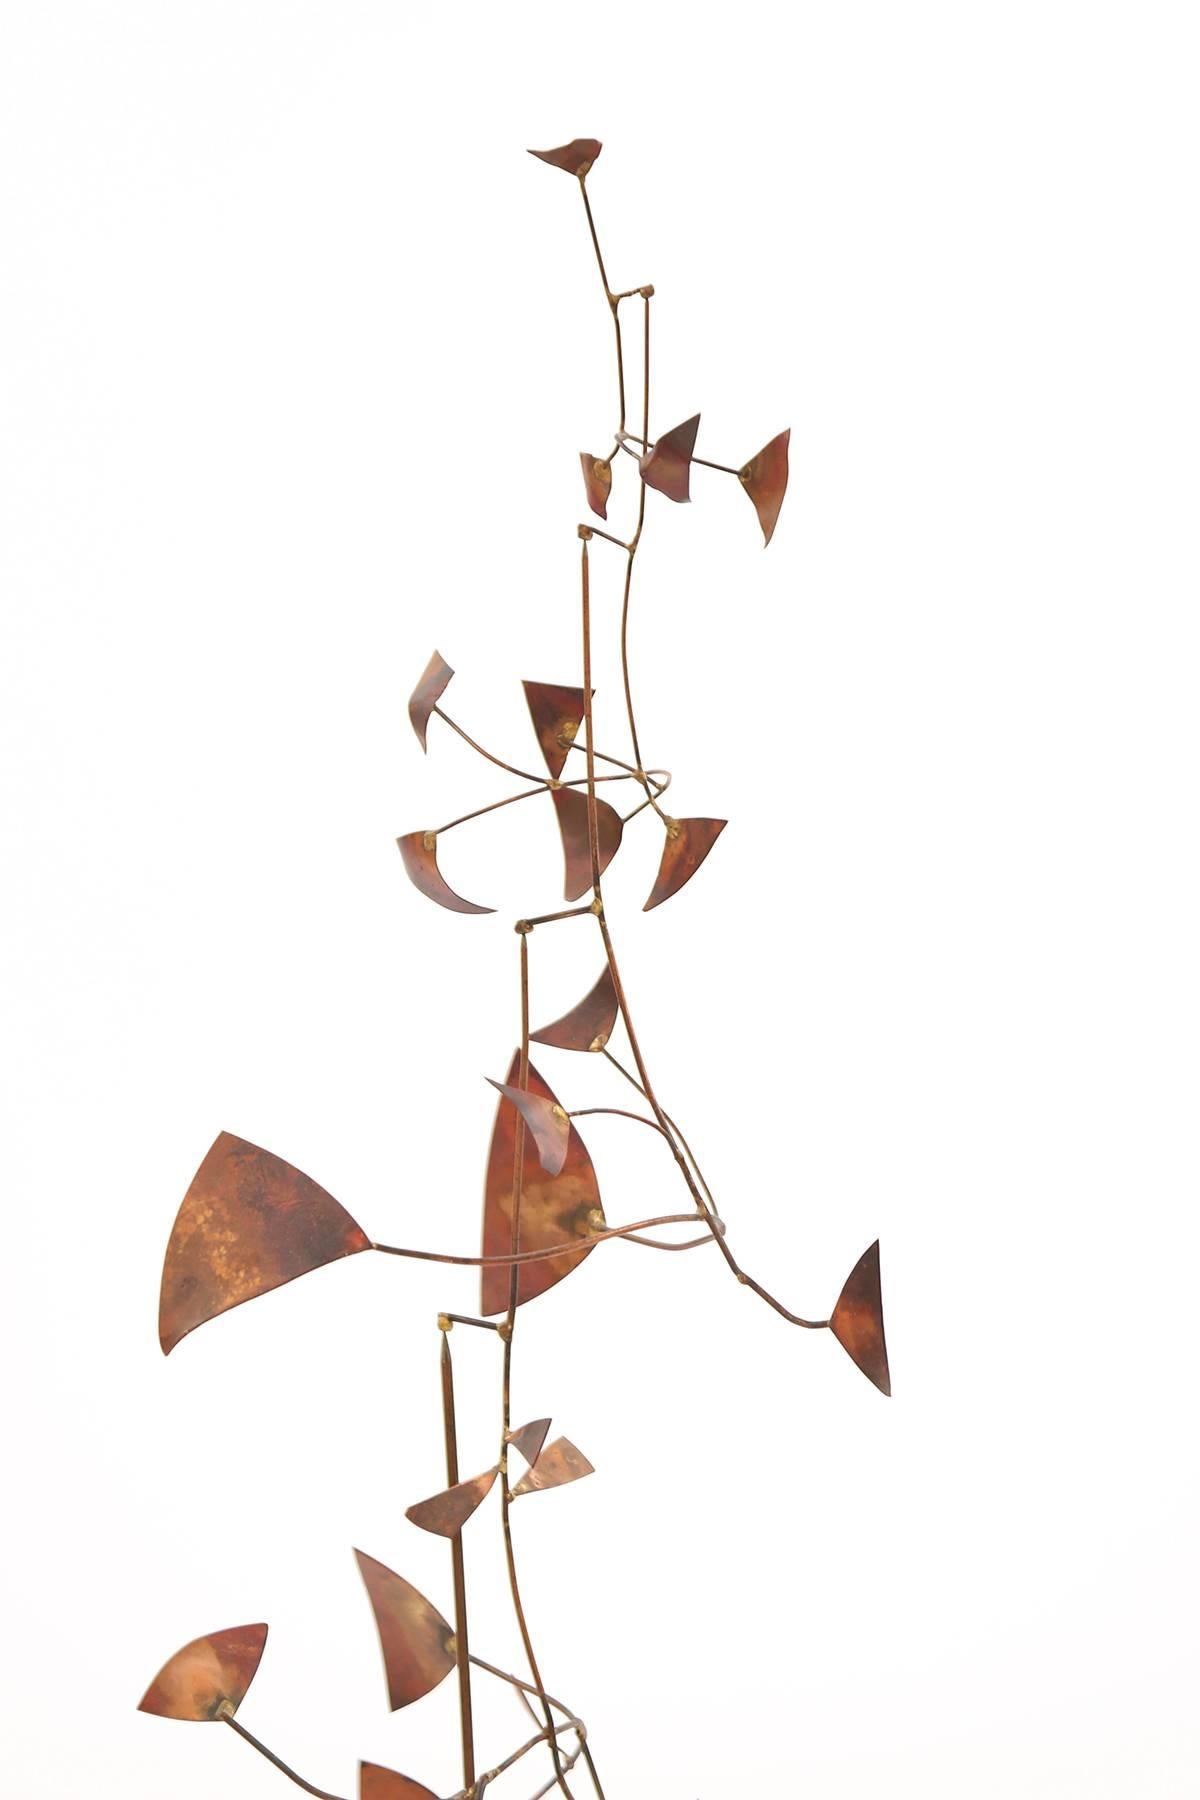 Patinated copper stabile, circa early 1970s. This all original example has several arms with free-form attachments. The arms all move creating a beautiful Kinetic sculpture. Unknown artist.